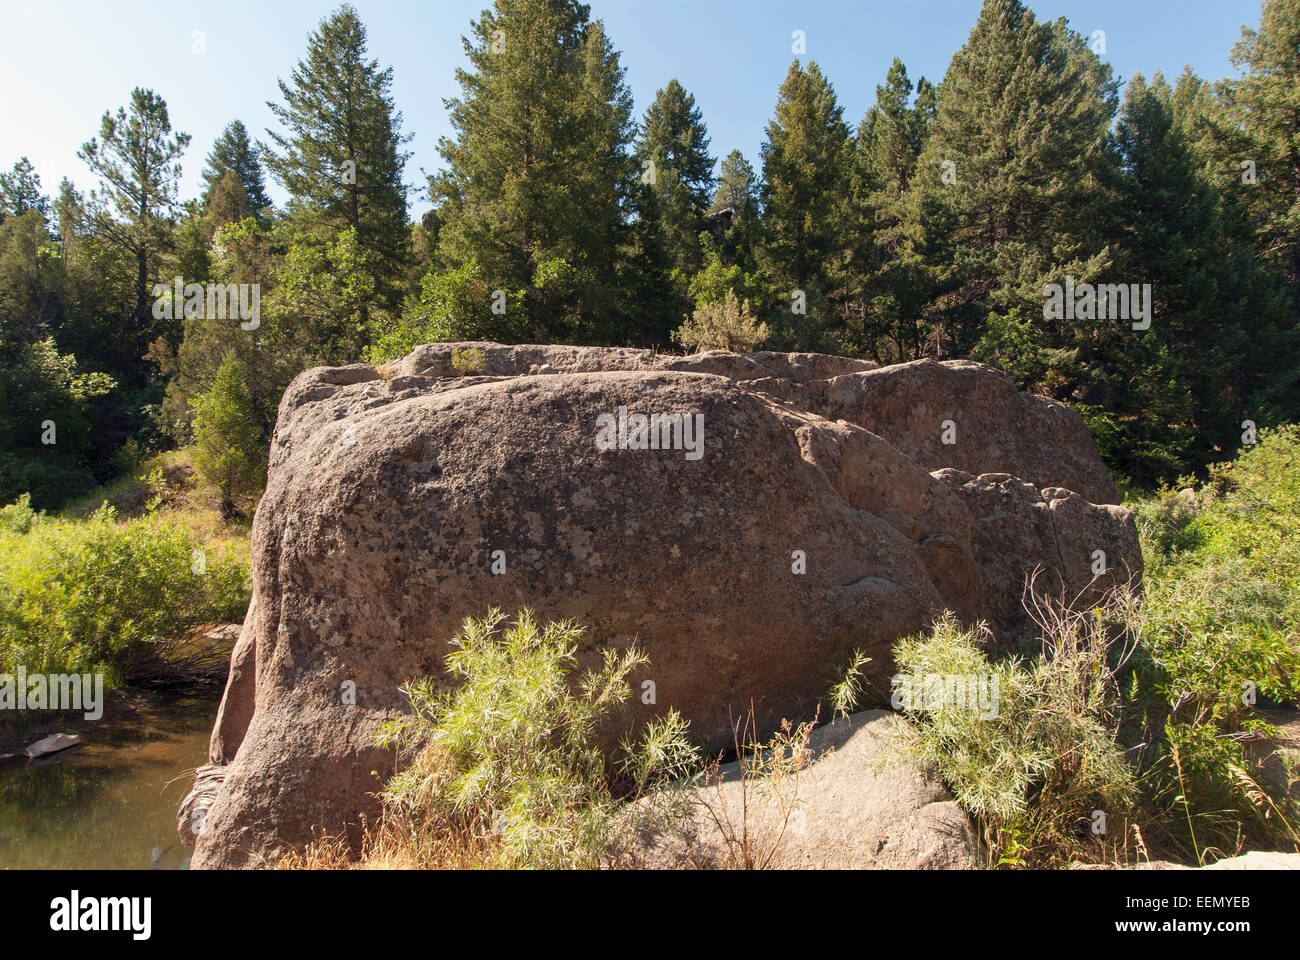 A vista in Castlewood Canyon State Park, Colorado Stock Photo